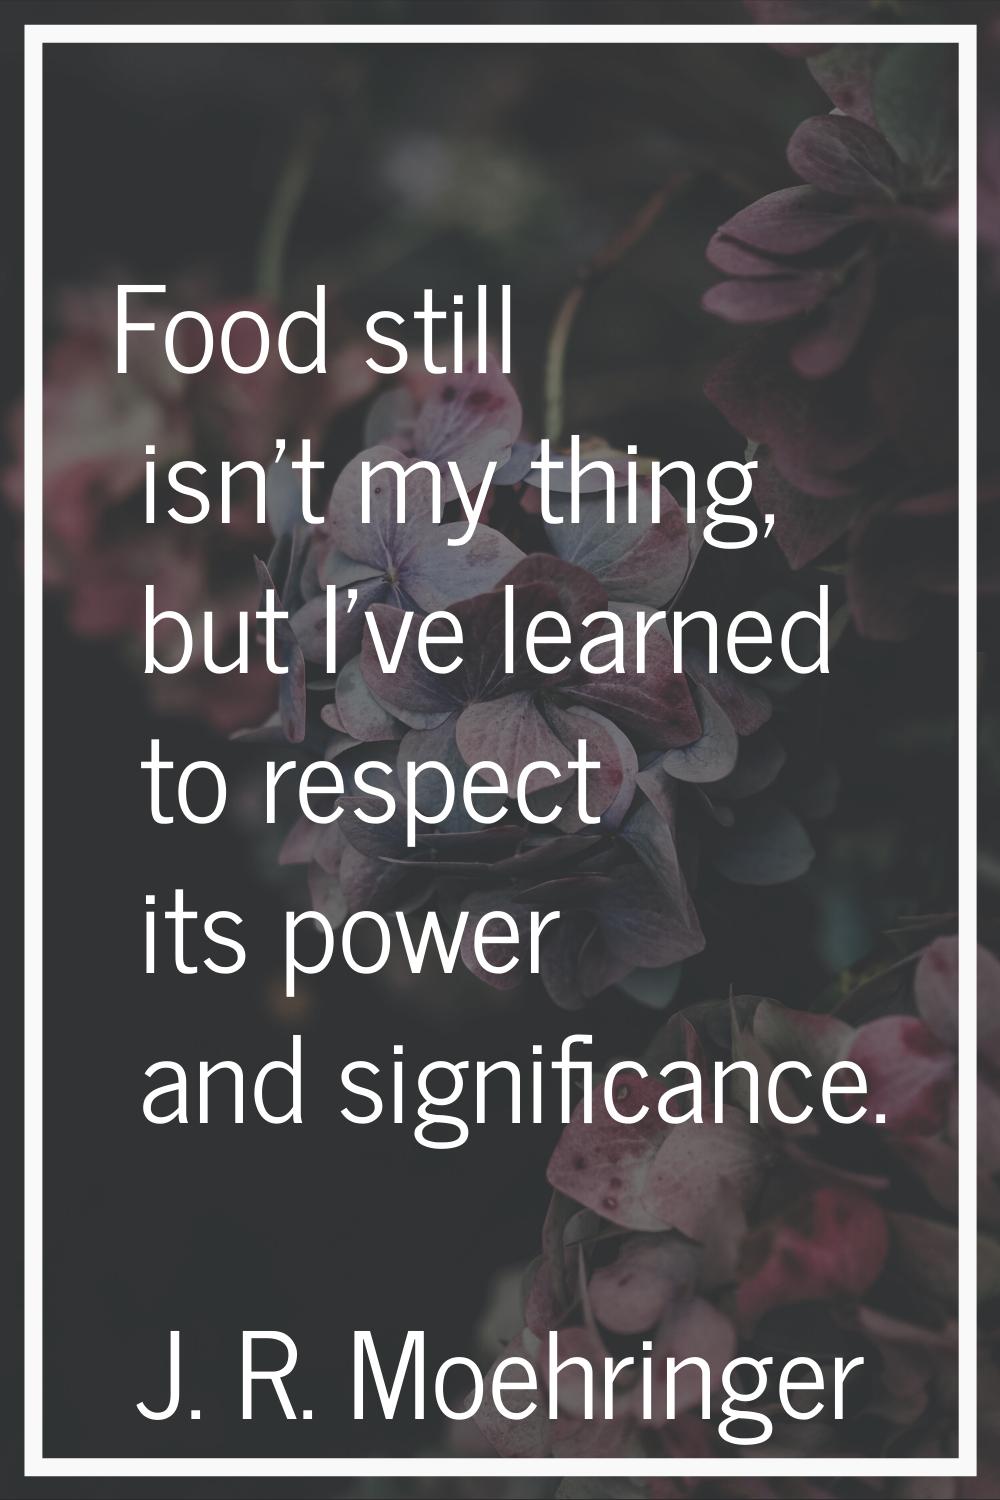 Food still isn't my thing, but I've learned to respect its power and significance.